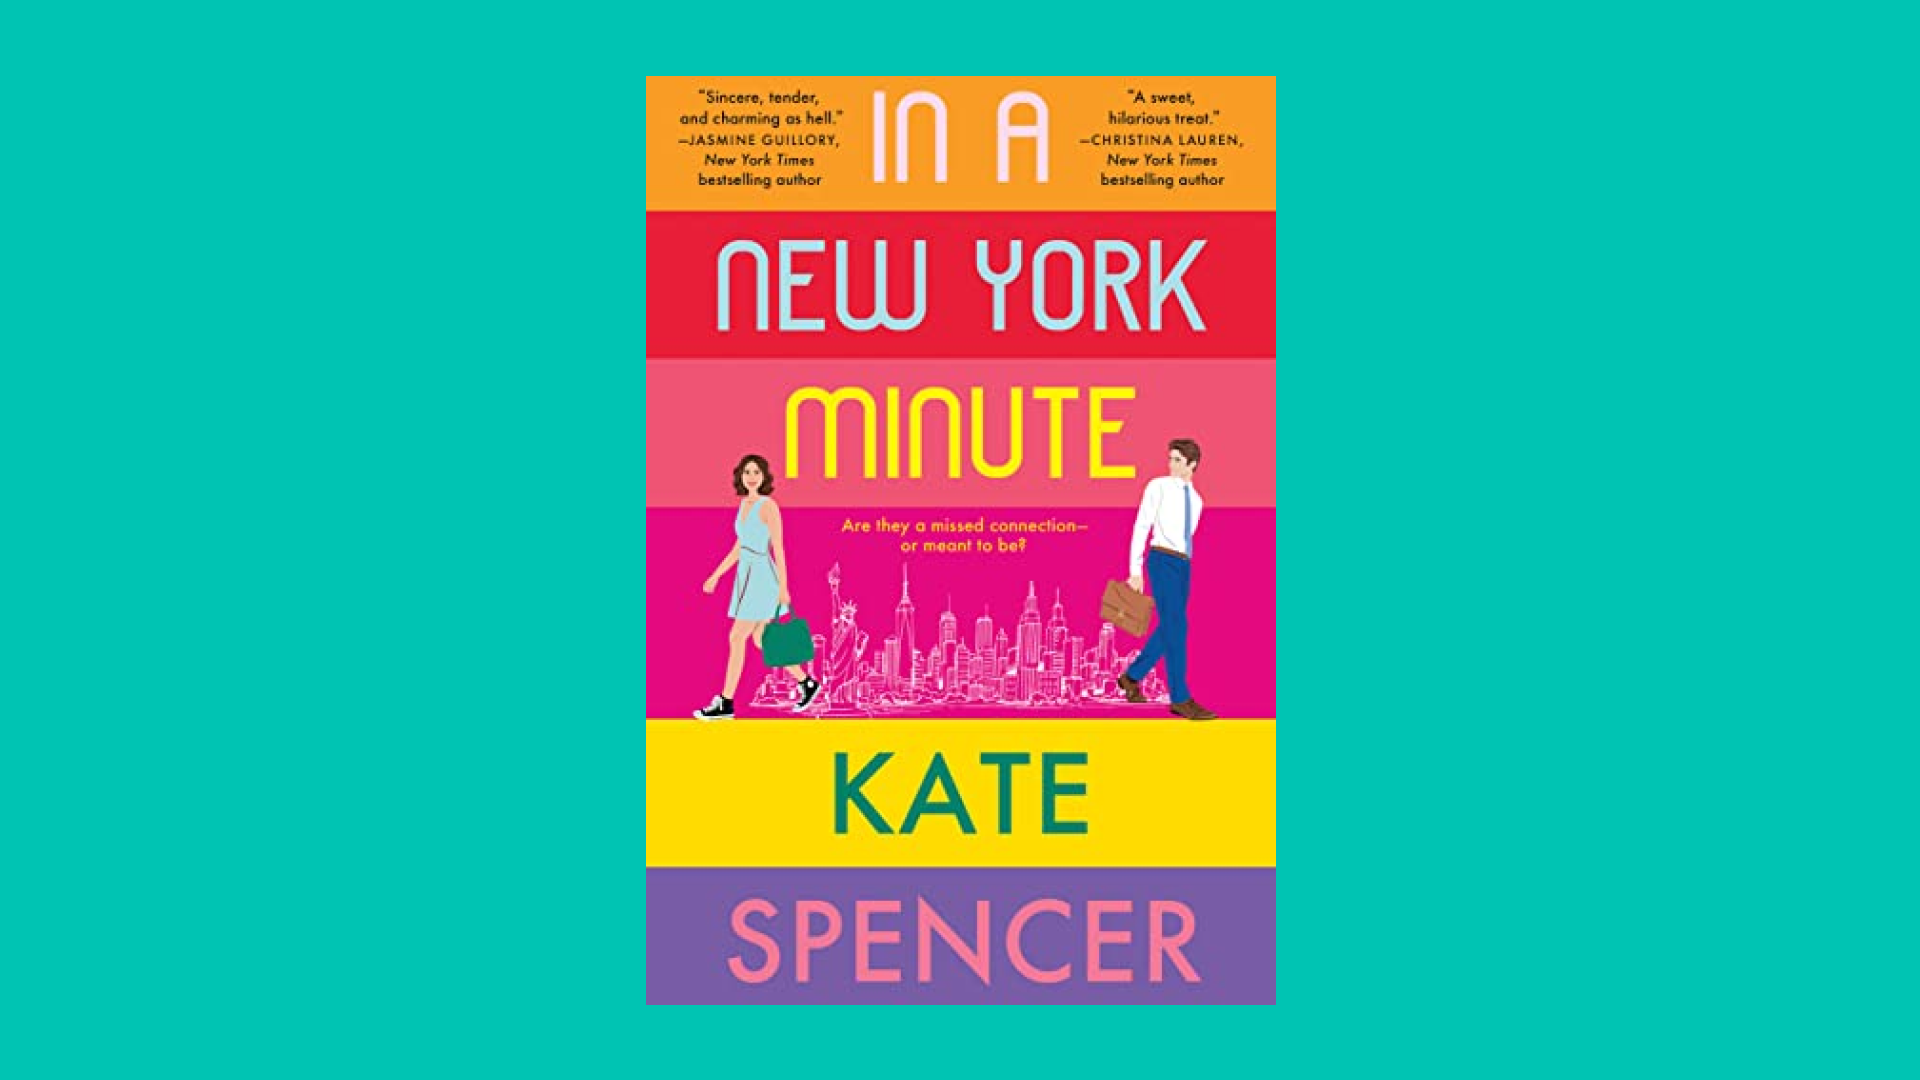 “In a New York Minute” by Kate Spencer 